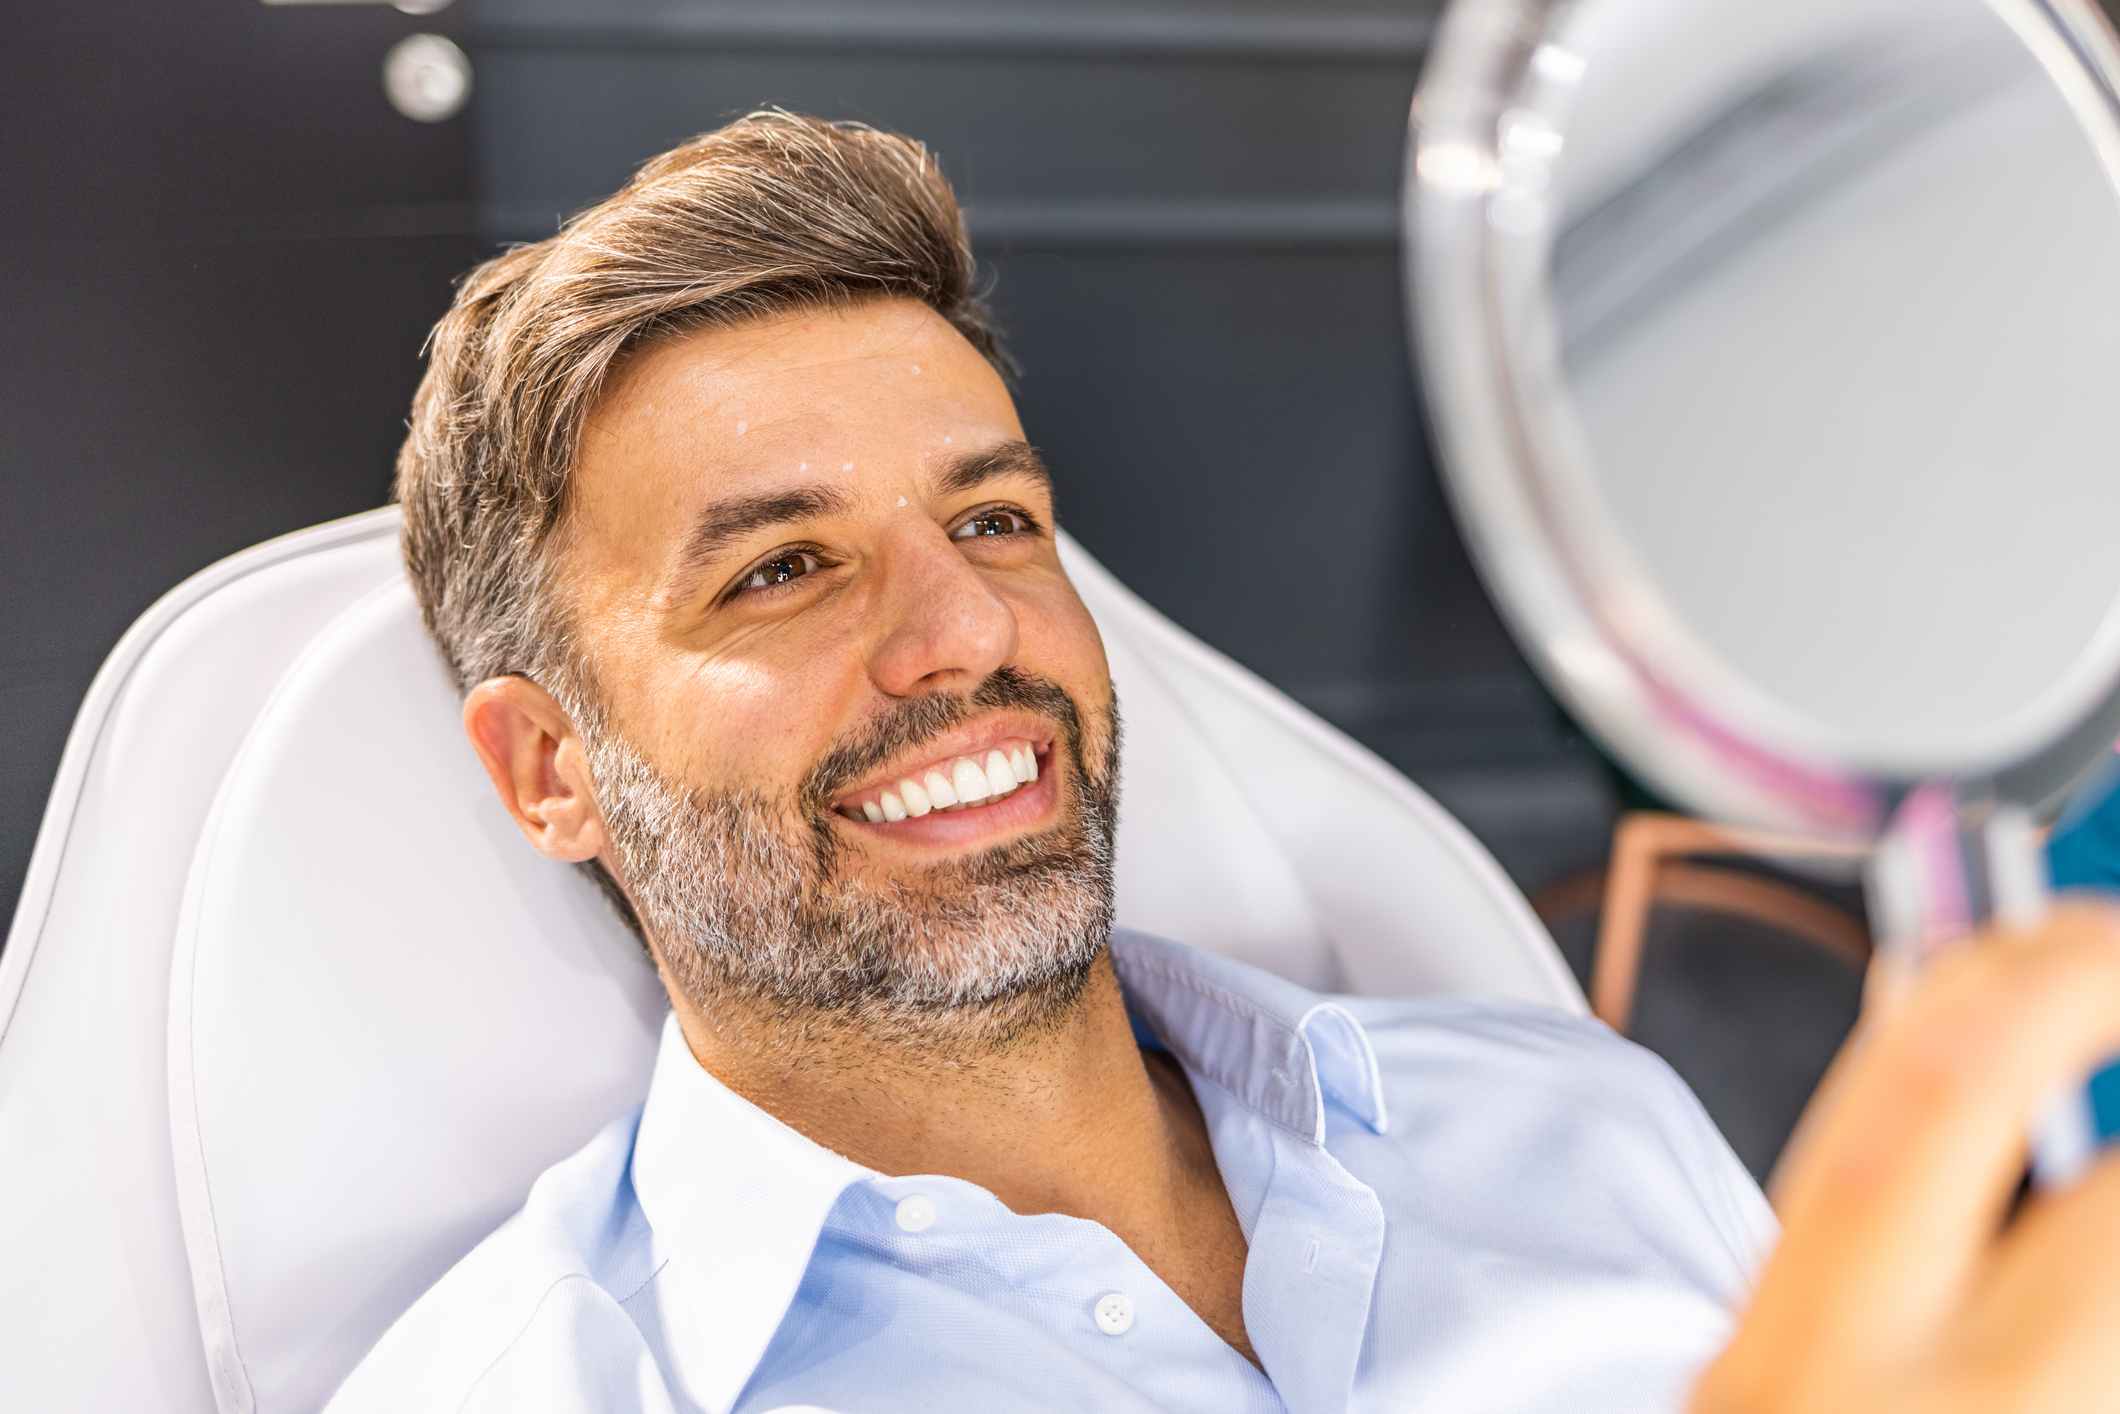 Middle aged man reviewing wrinkles in hand mirror